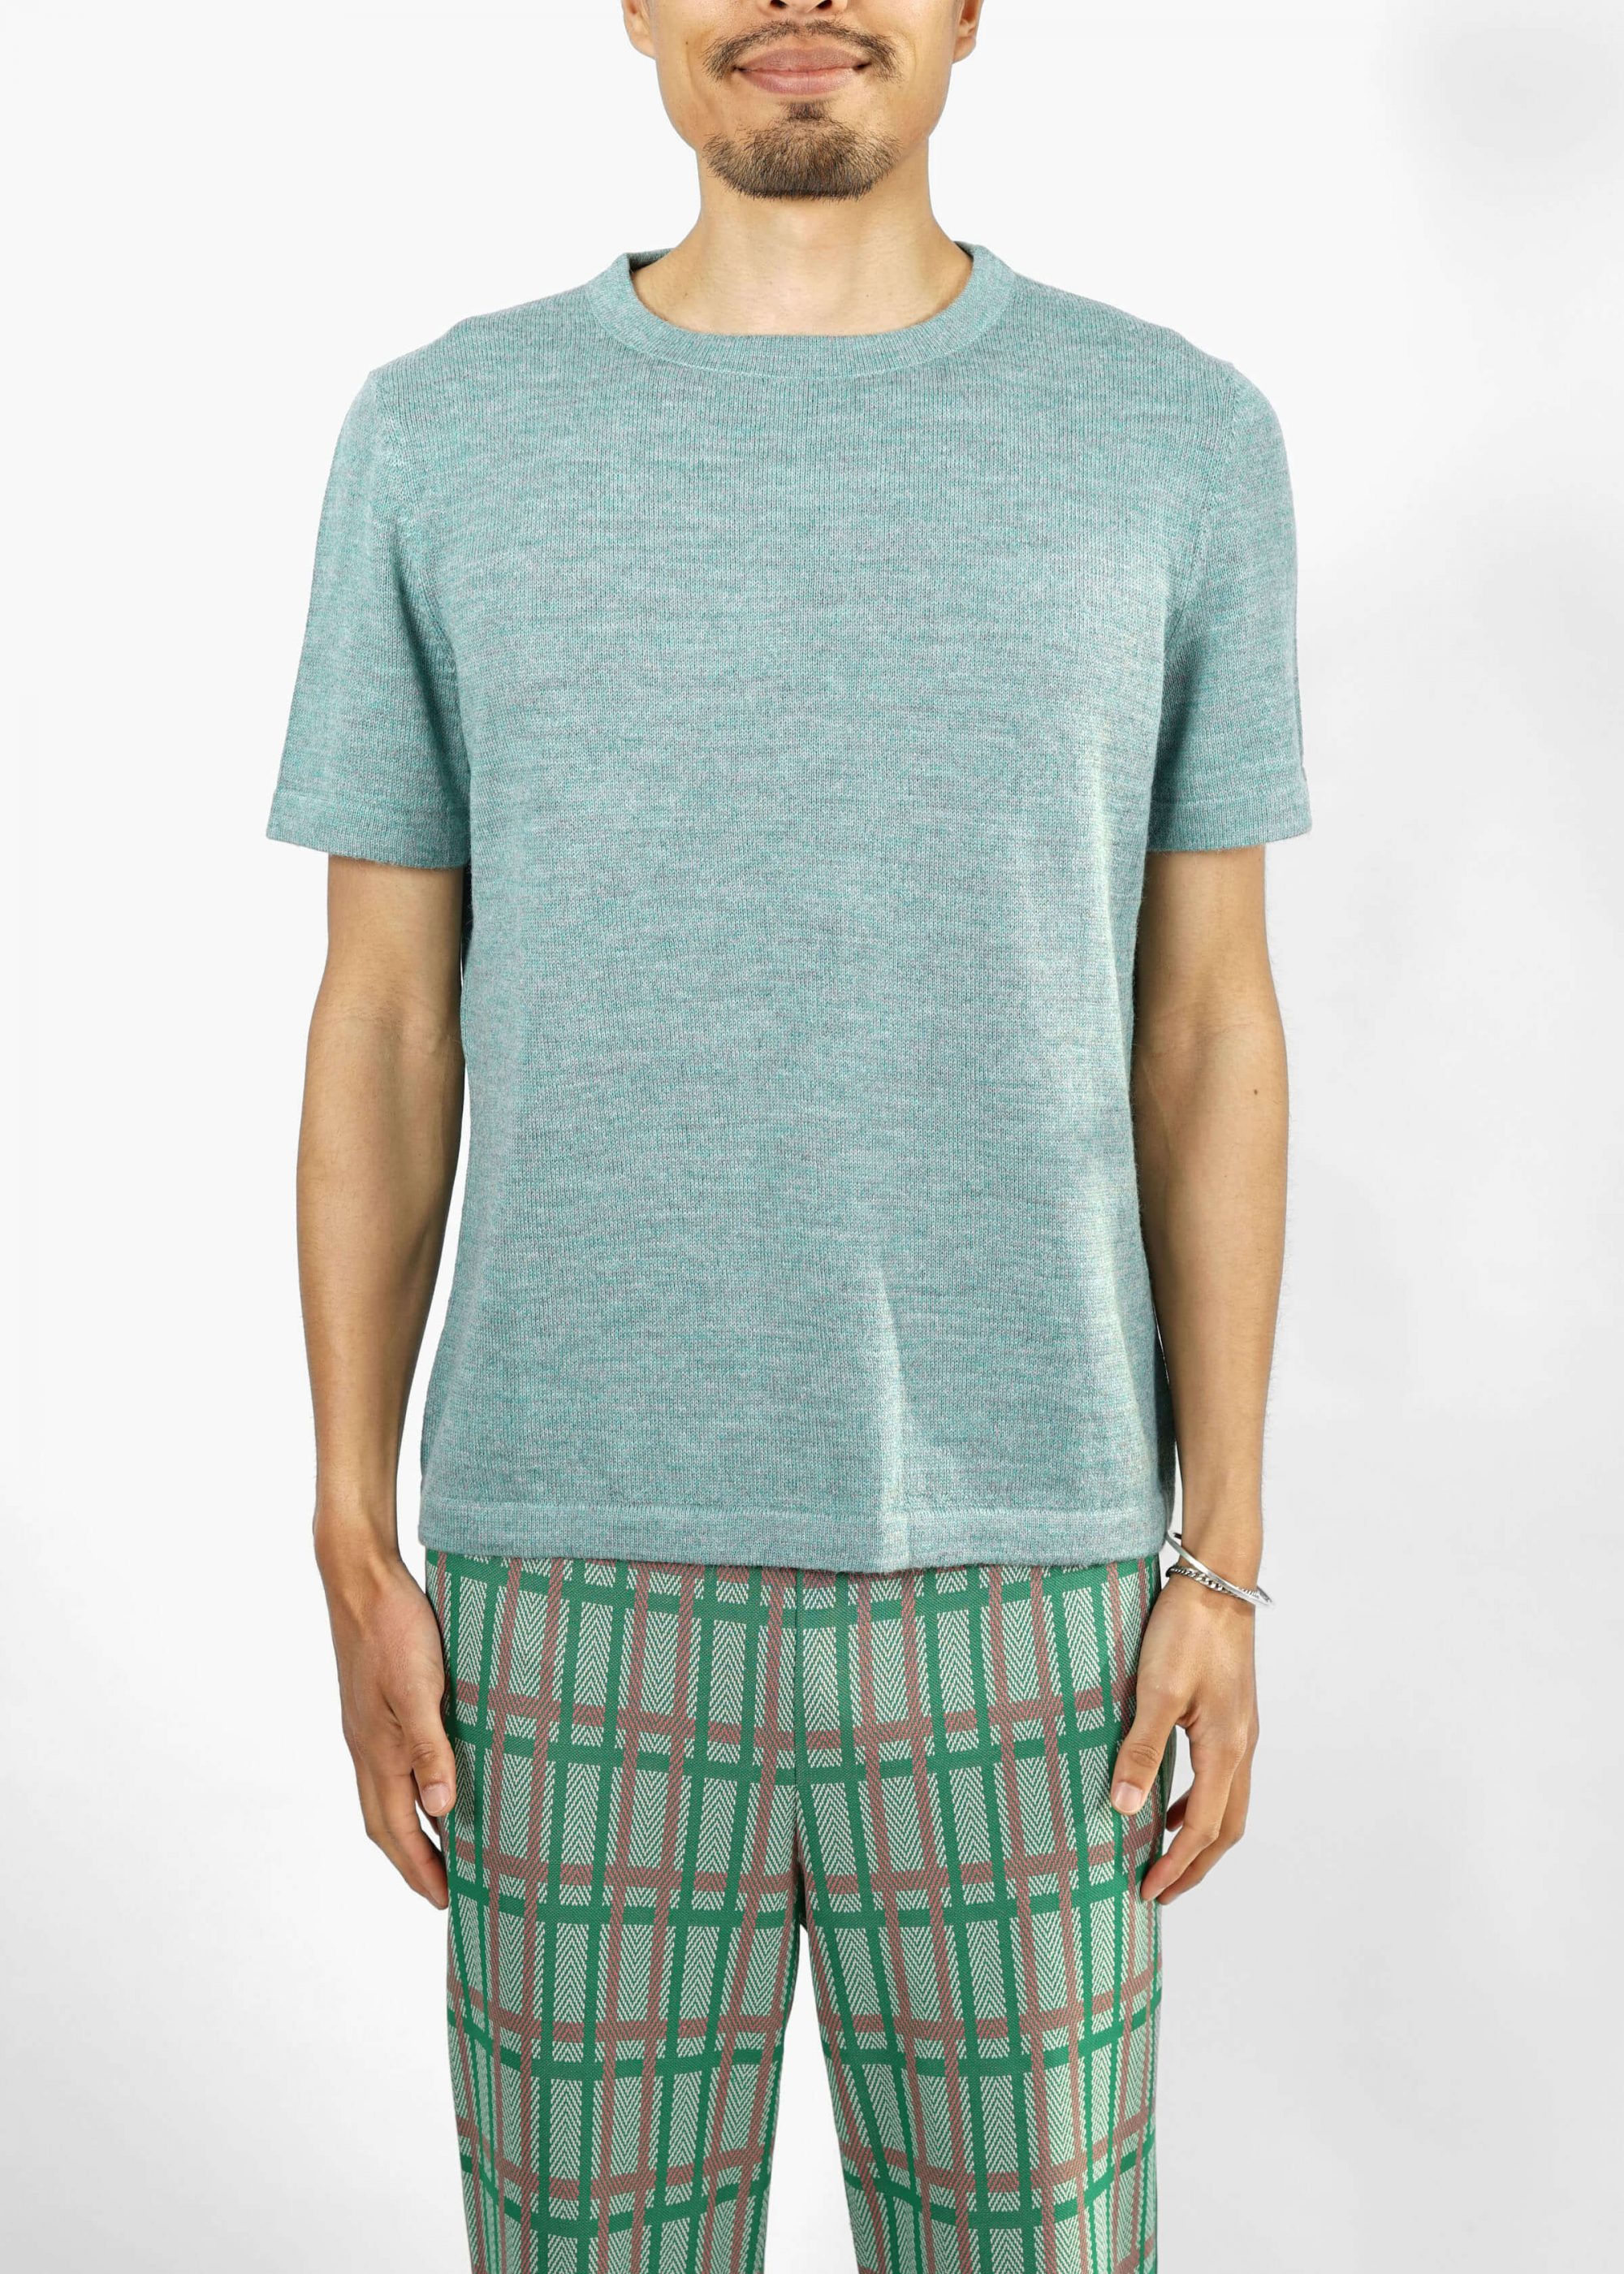 Product image for »Aqua« Short-Sleeve Knit Top | Turquoise